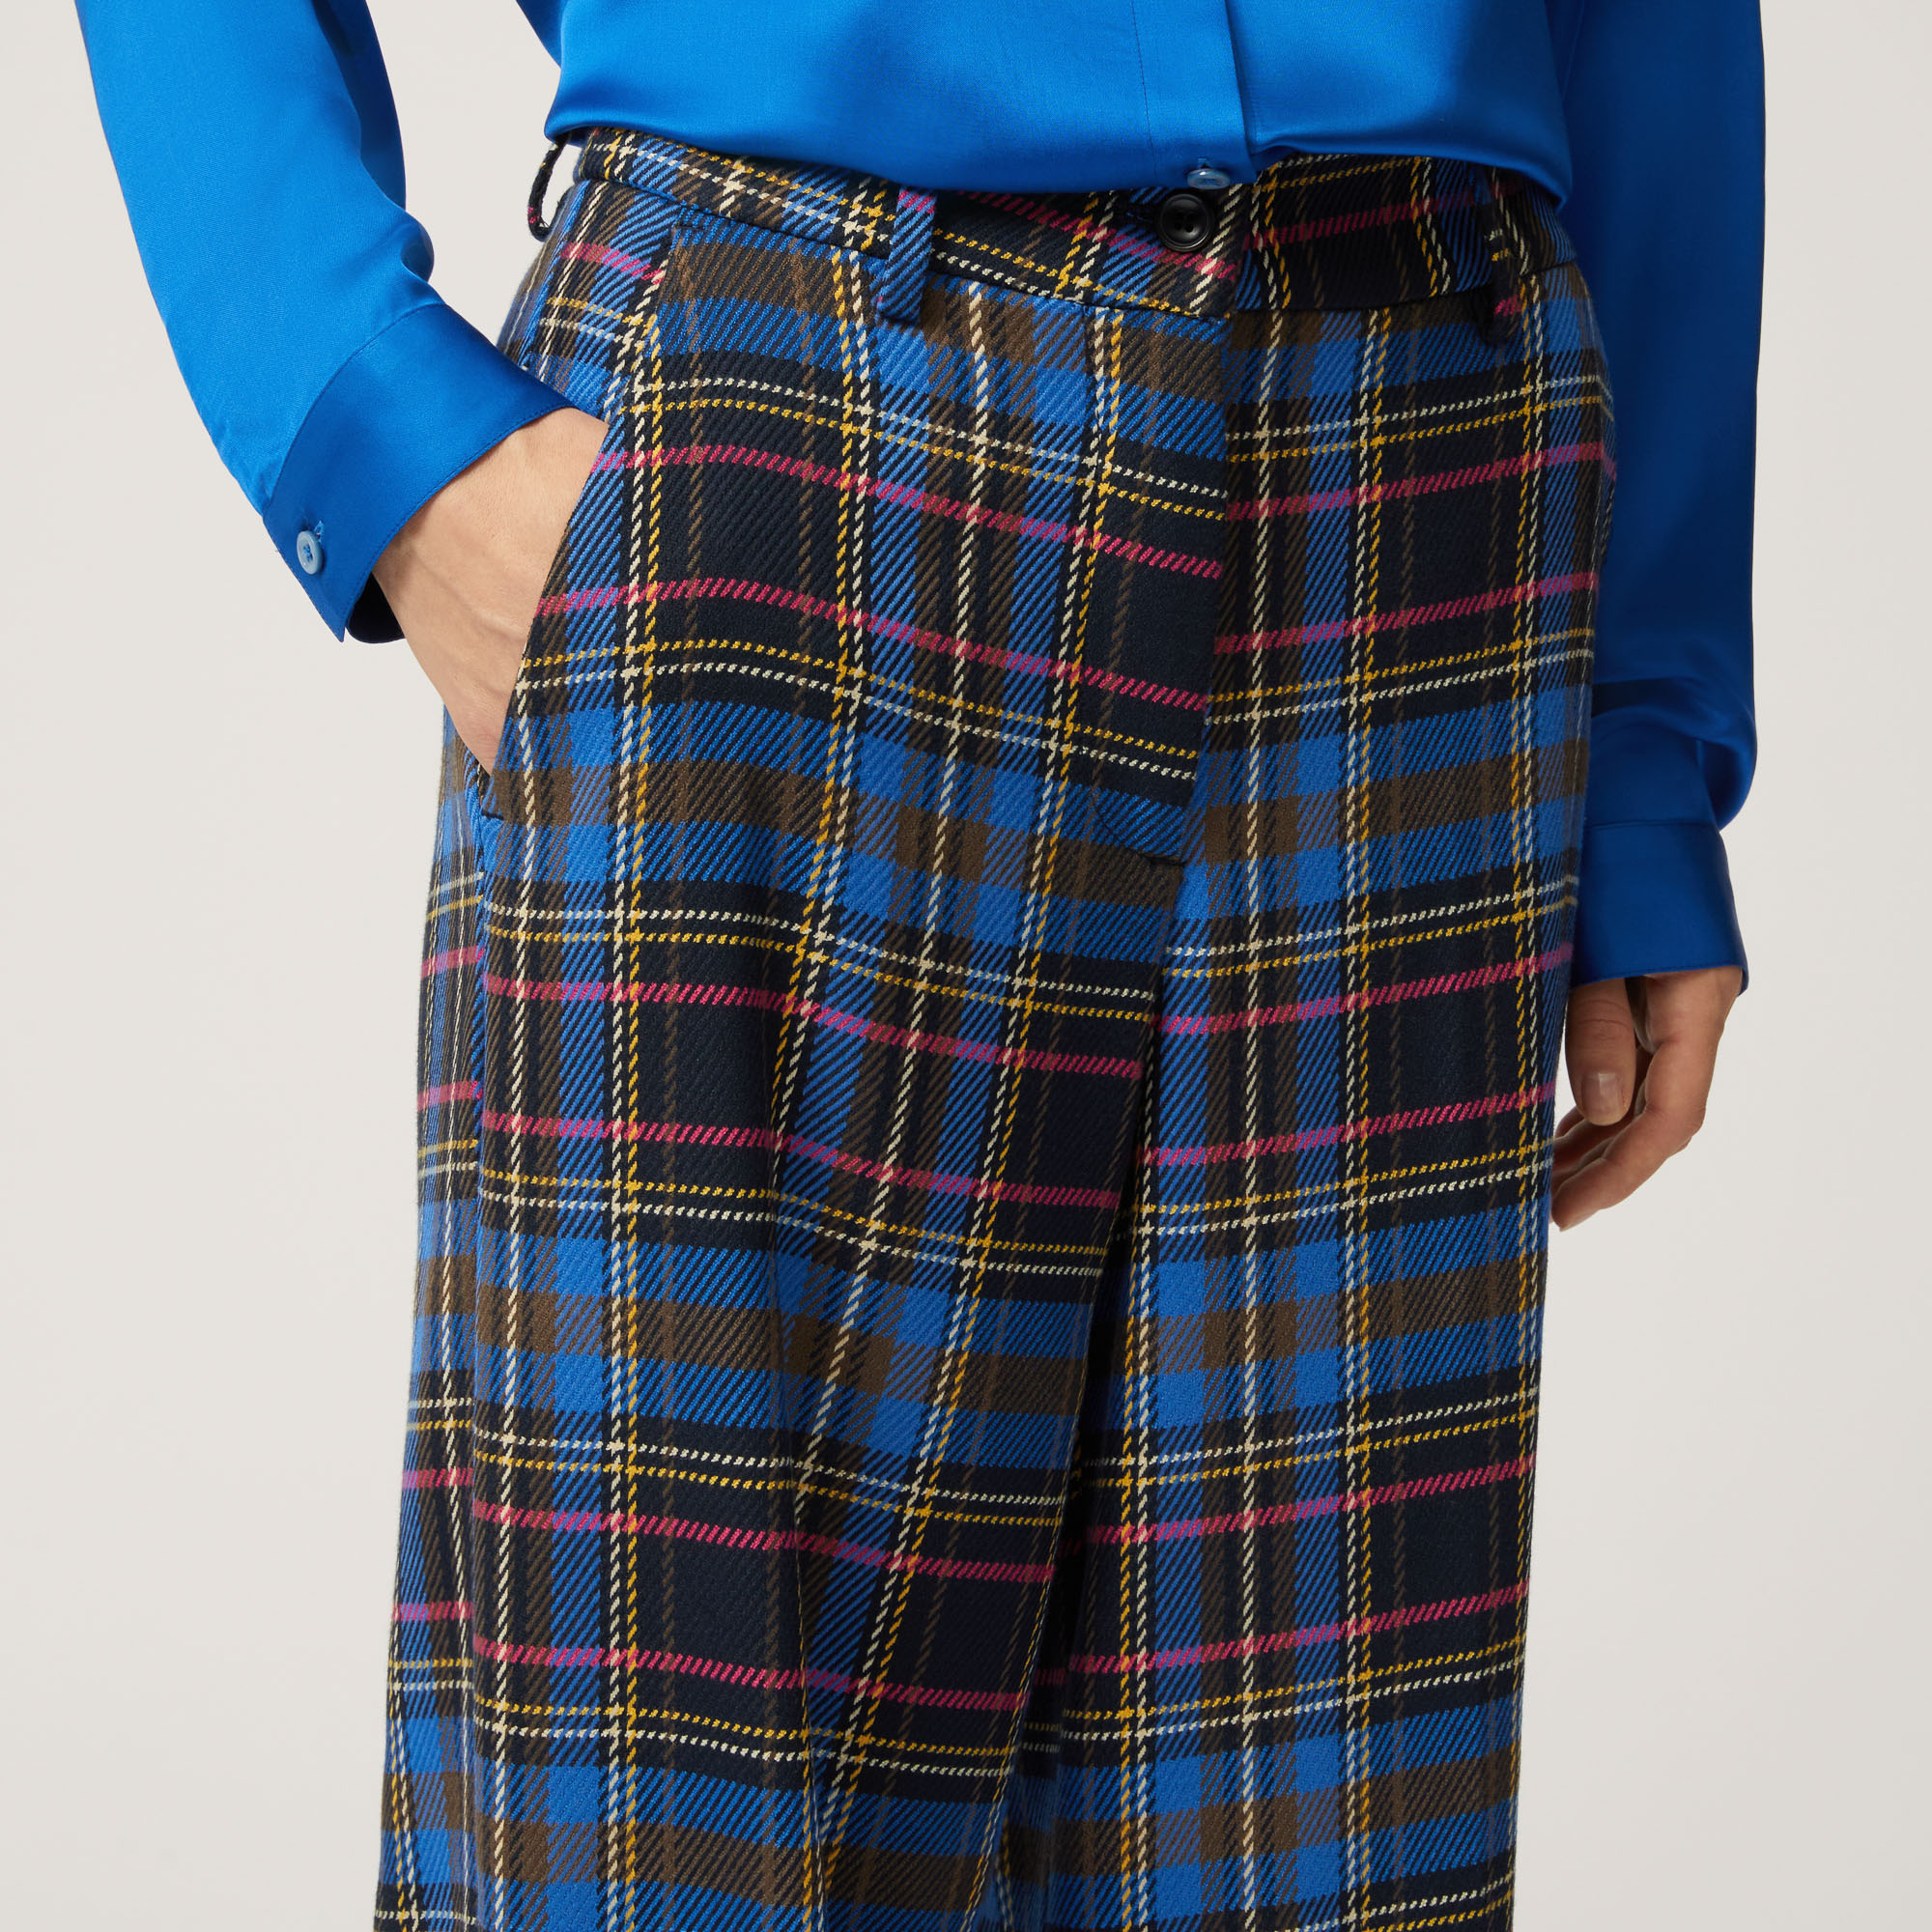 High-Waist Pants With Chequered Pattern, Blue, large